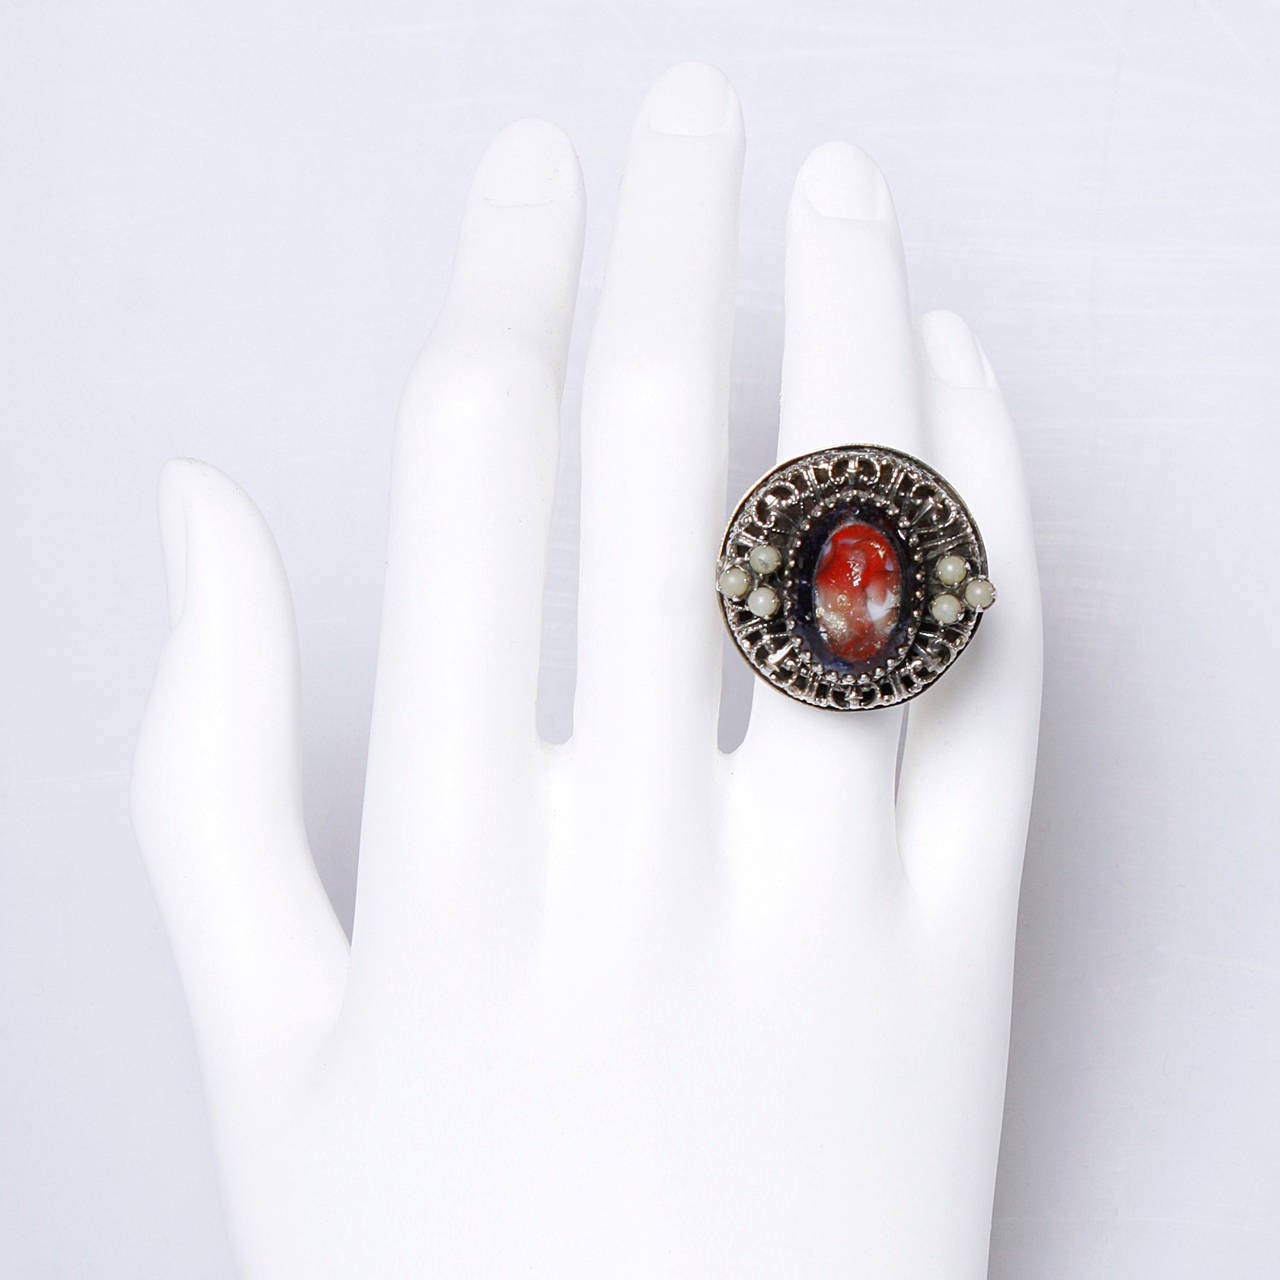 Large filligree cocktail ring by Elsa Schiaparelli. Signed on the back of the piece.

Details:

Closed Band
Hollow
Size: 9
Color: Gold Metallic/ Blood Red/ Black Iridescent/ Tan/ Light Gray/ Pale Yellow/ Silver
Signature: